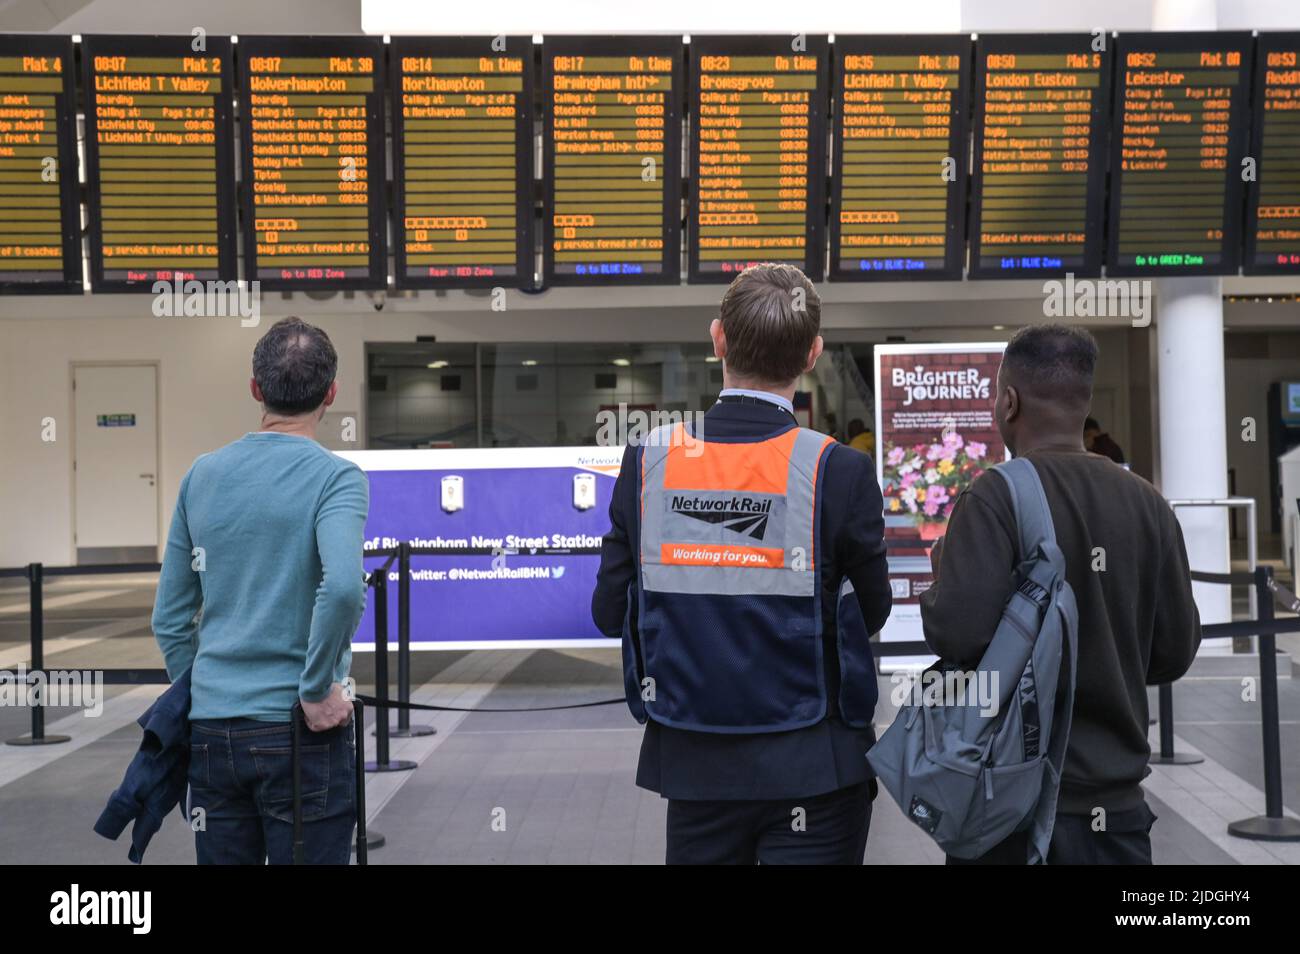 New Street, Birmingham, England, June 21st 2022. An eerily almost empty Birmingham New Street Station as rail workers strike for a 7 percent wage increase across the British networks after RMT Unions failed to reach an agreement. There was a reduced service on the boards. Pic by Credit: Sam Holiday/Alamy Live News Stock Photo